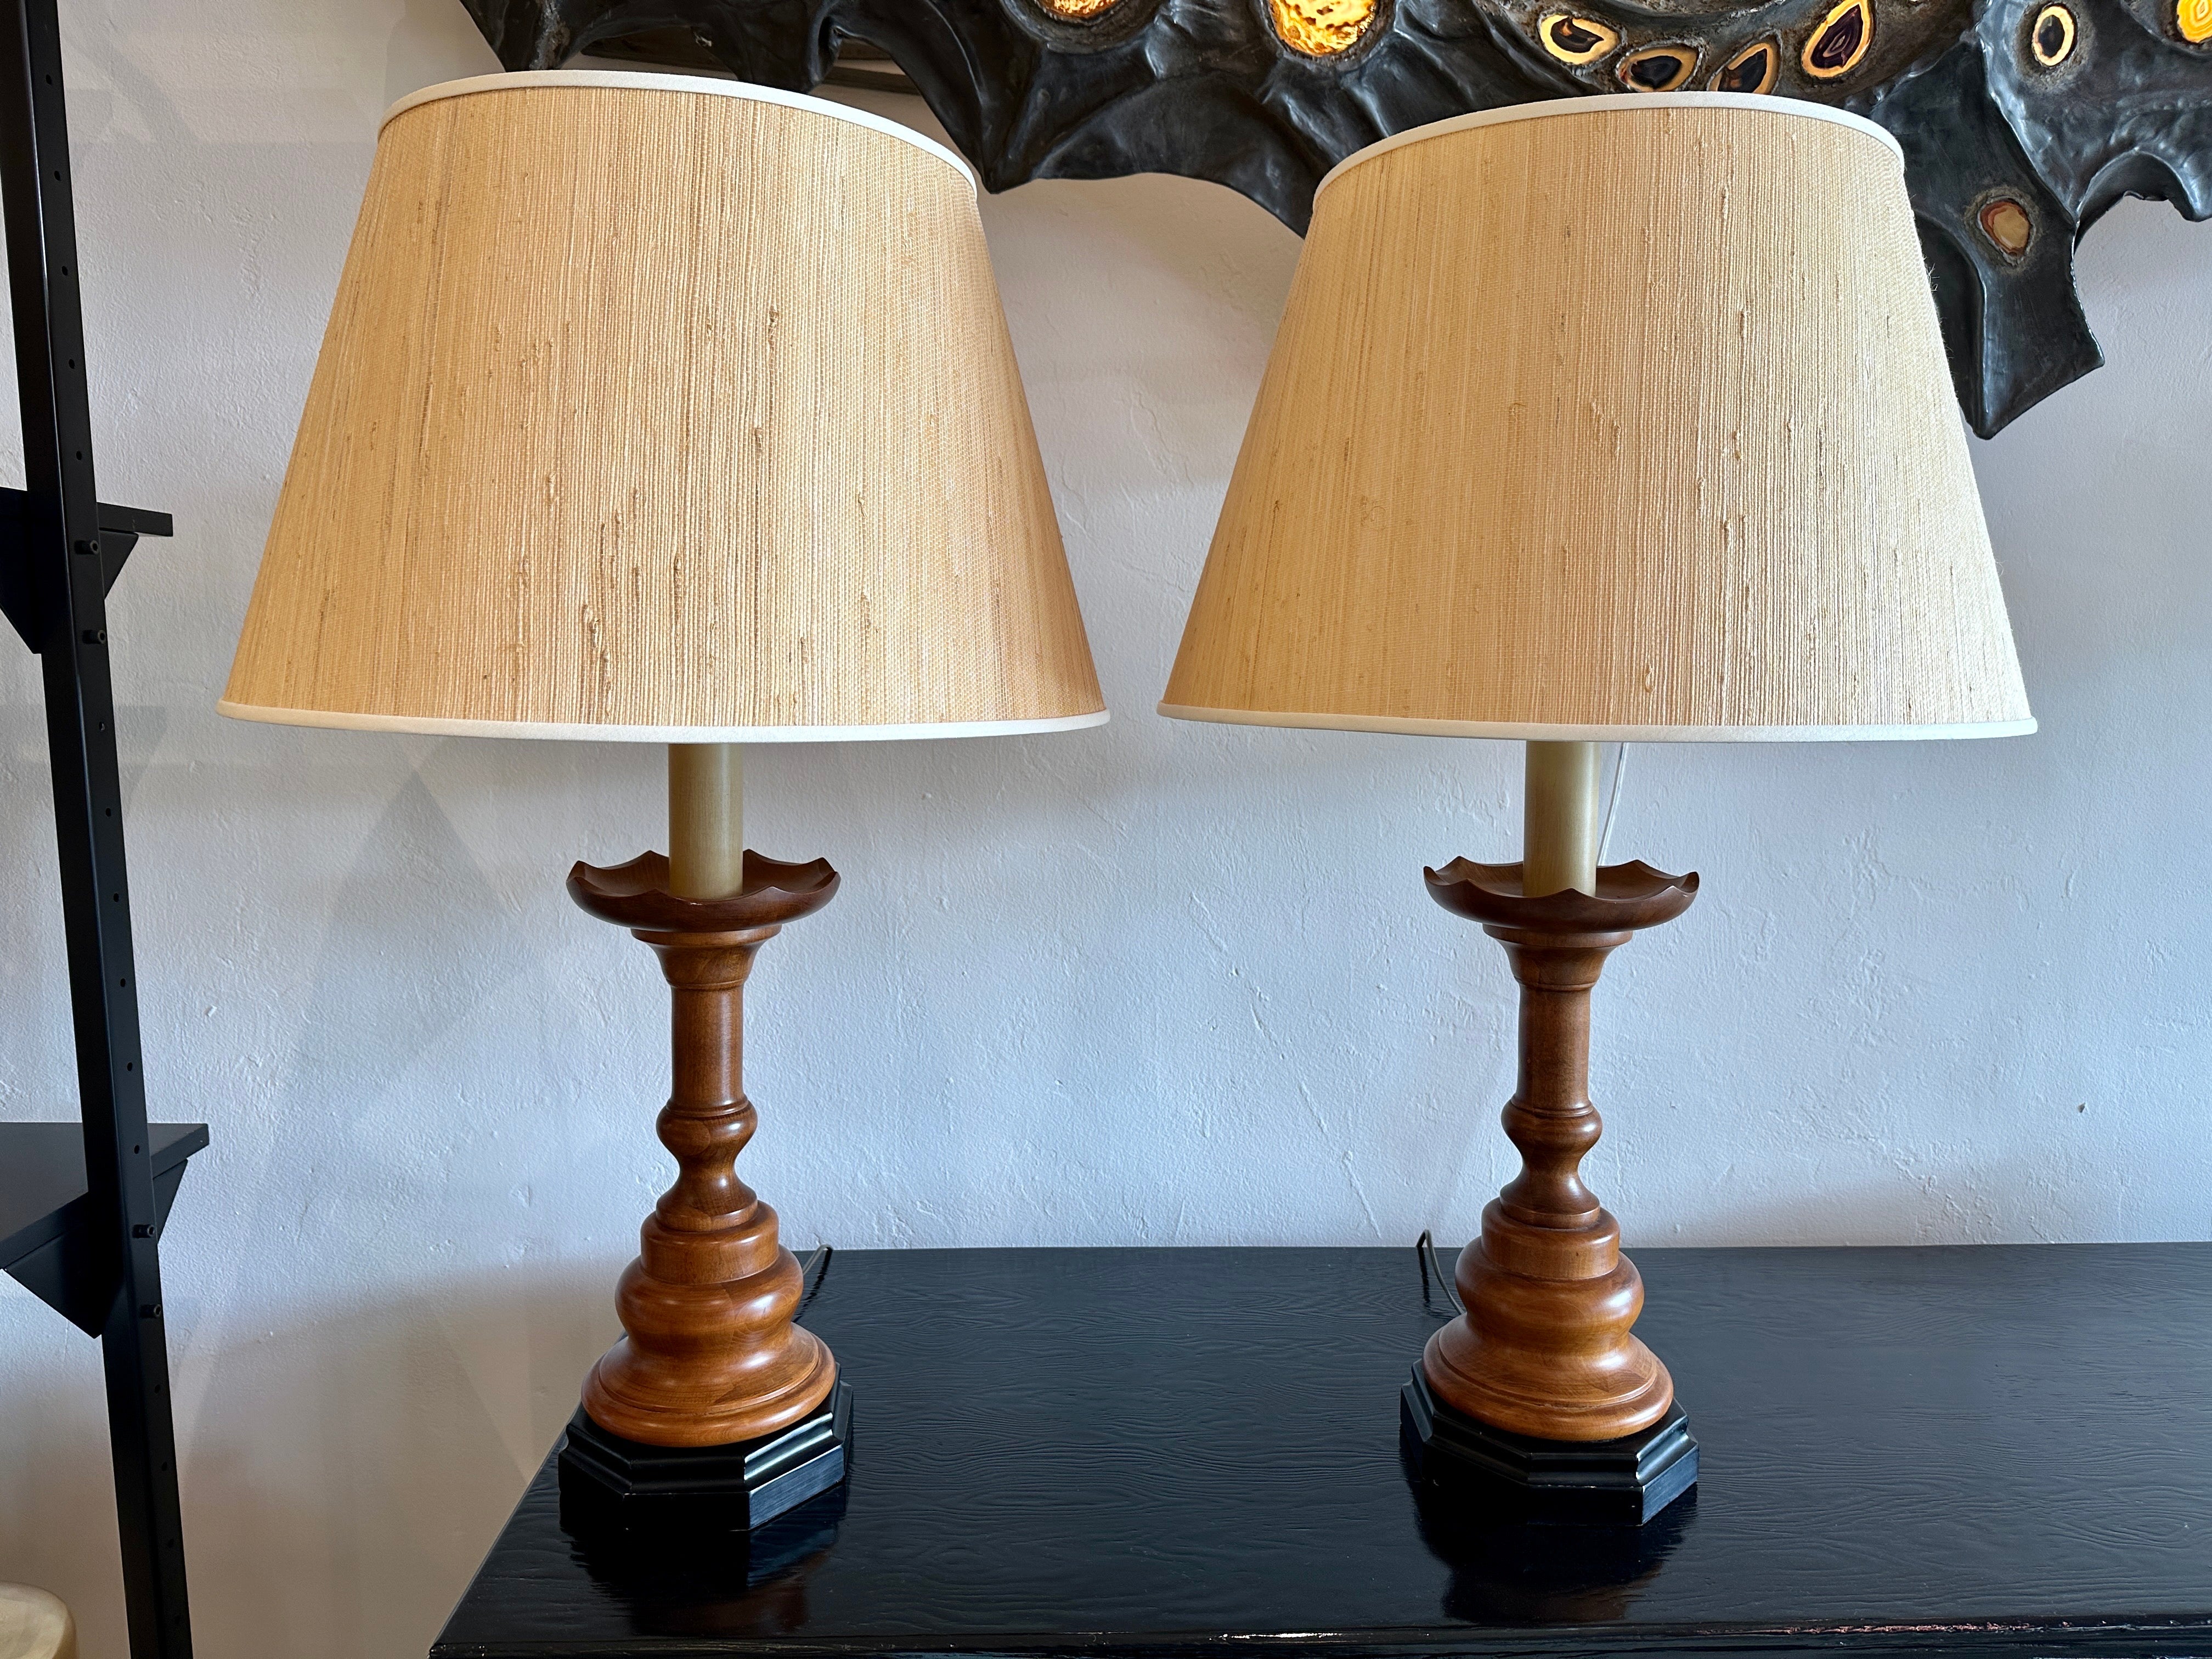 Beautiful rich walnut turned wood lamps with black lacquered base. Working and in original as-found condition.  THIS ITEM IS LOCATED AND WILL SHIP FROM OUR EAST HAMPTON, NY SHOWROOM.

NOTE: Shades shown are NOT included - for photography and scale